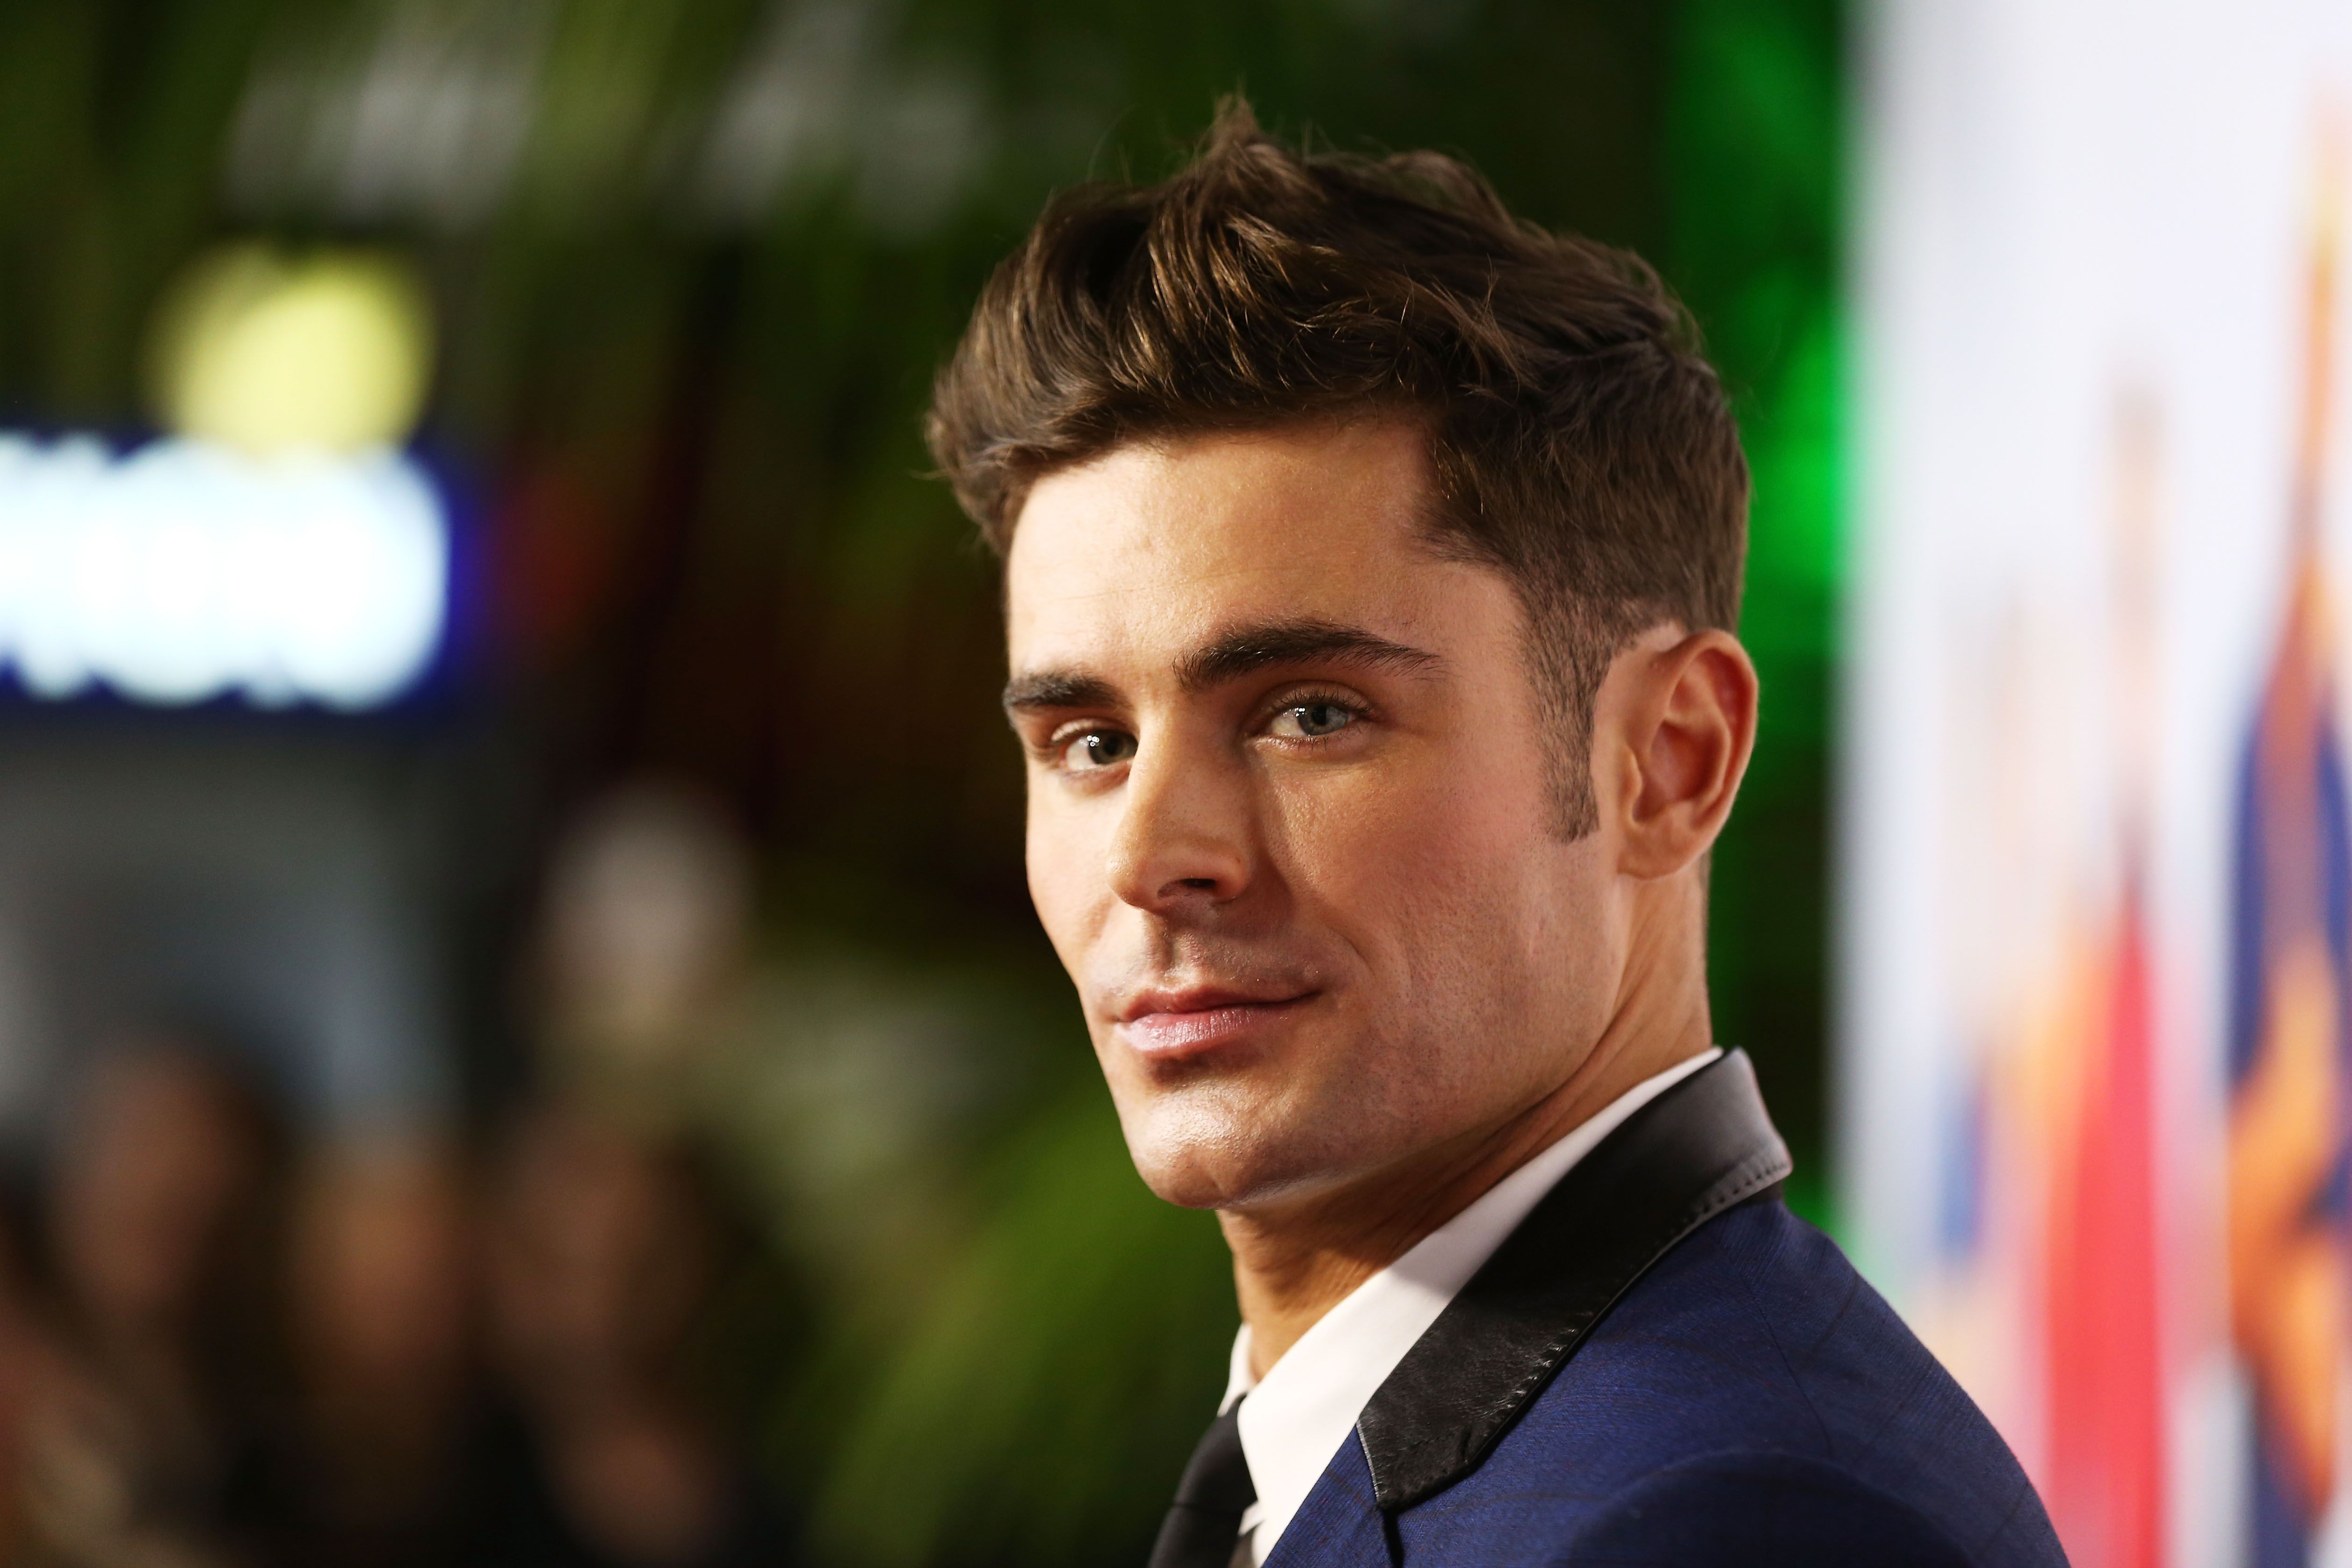 Zac Efron Dyed His Hair Platinum in New Instagram Photo